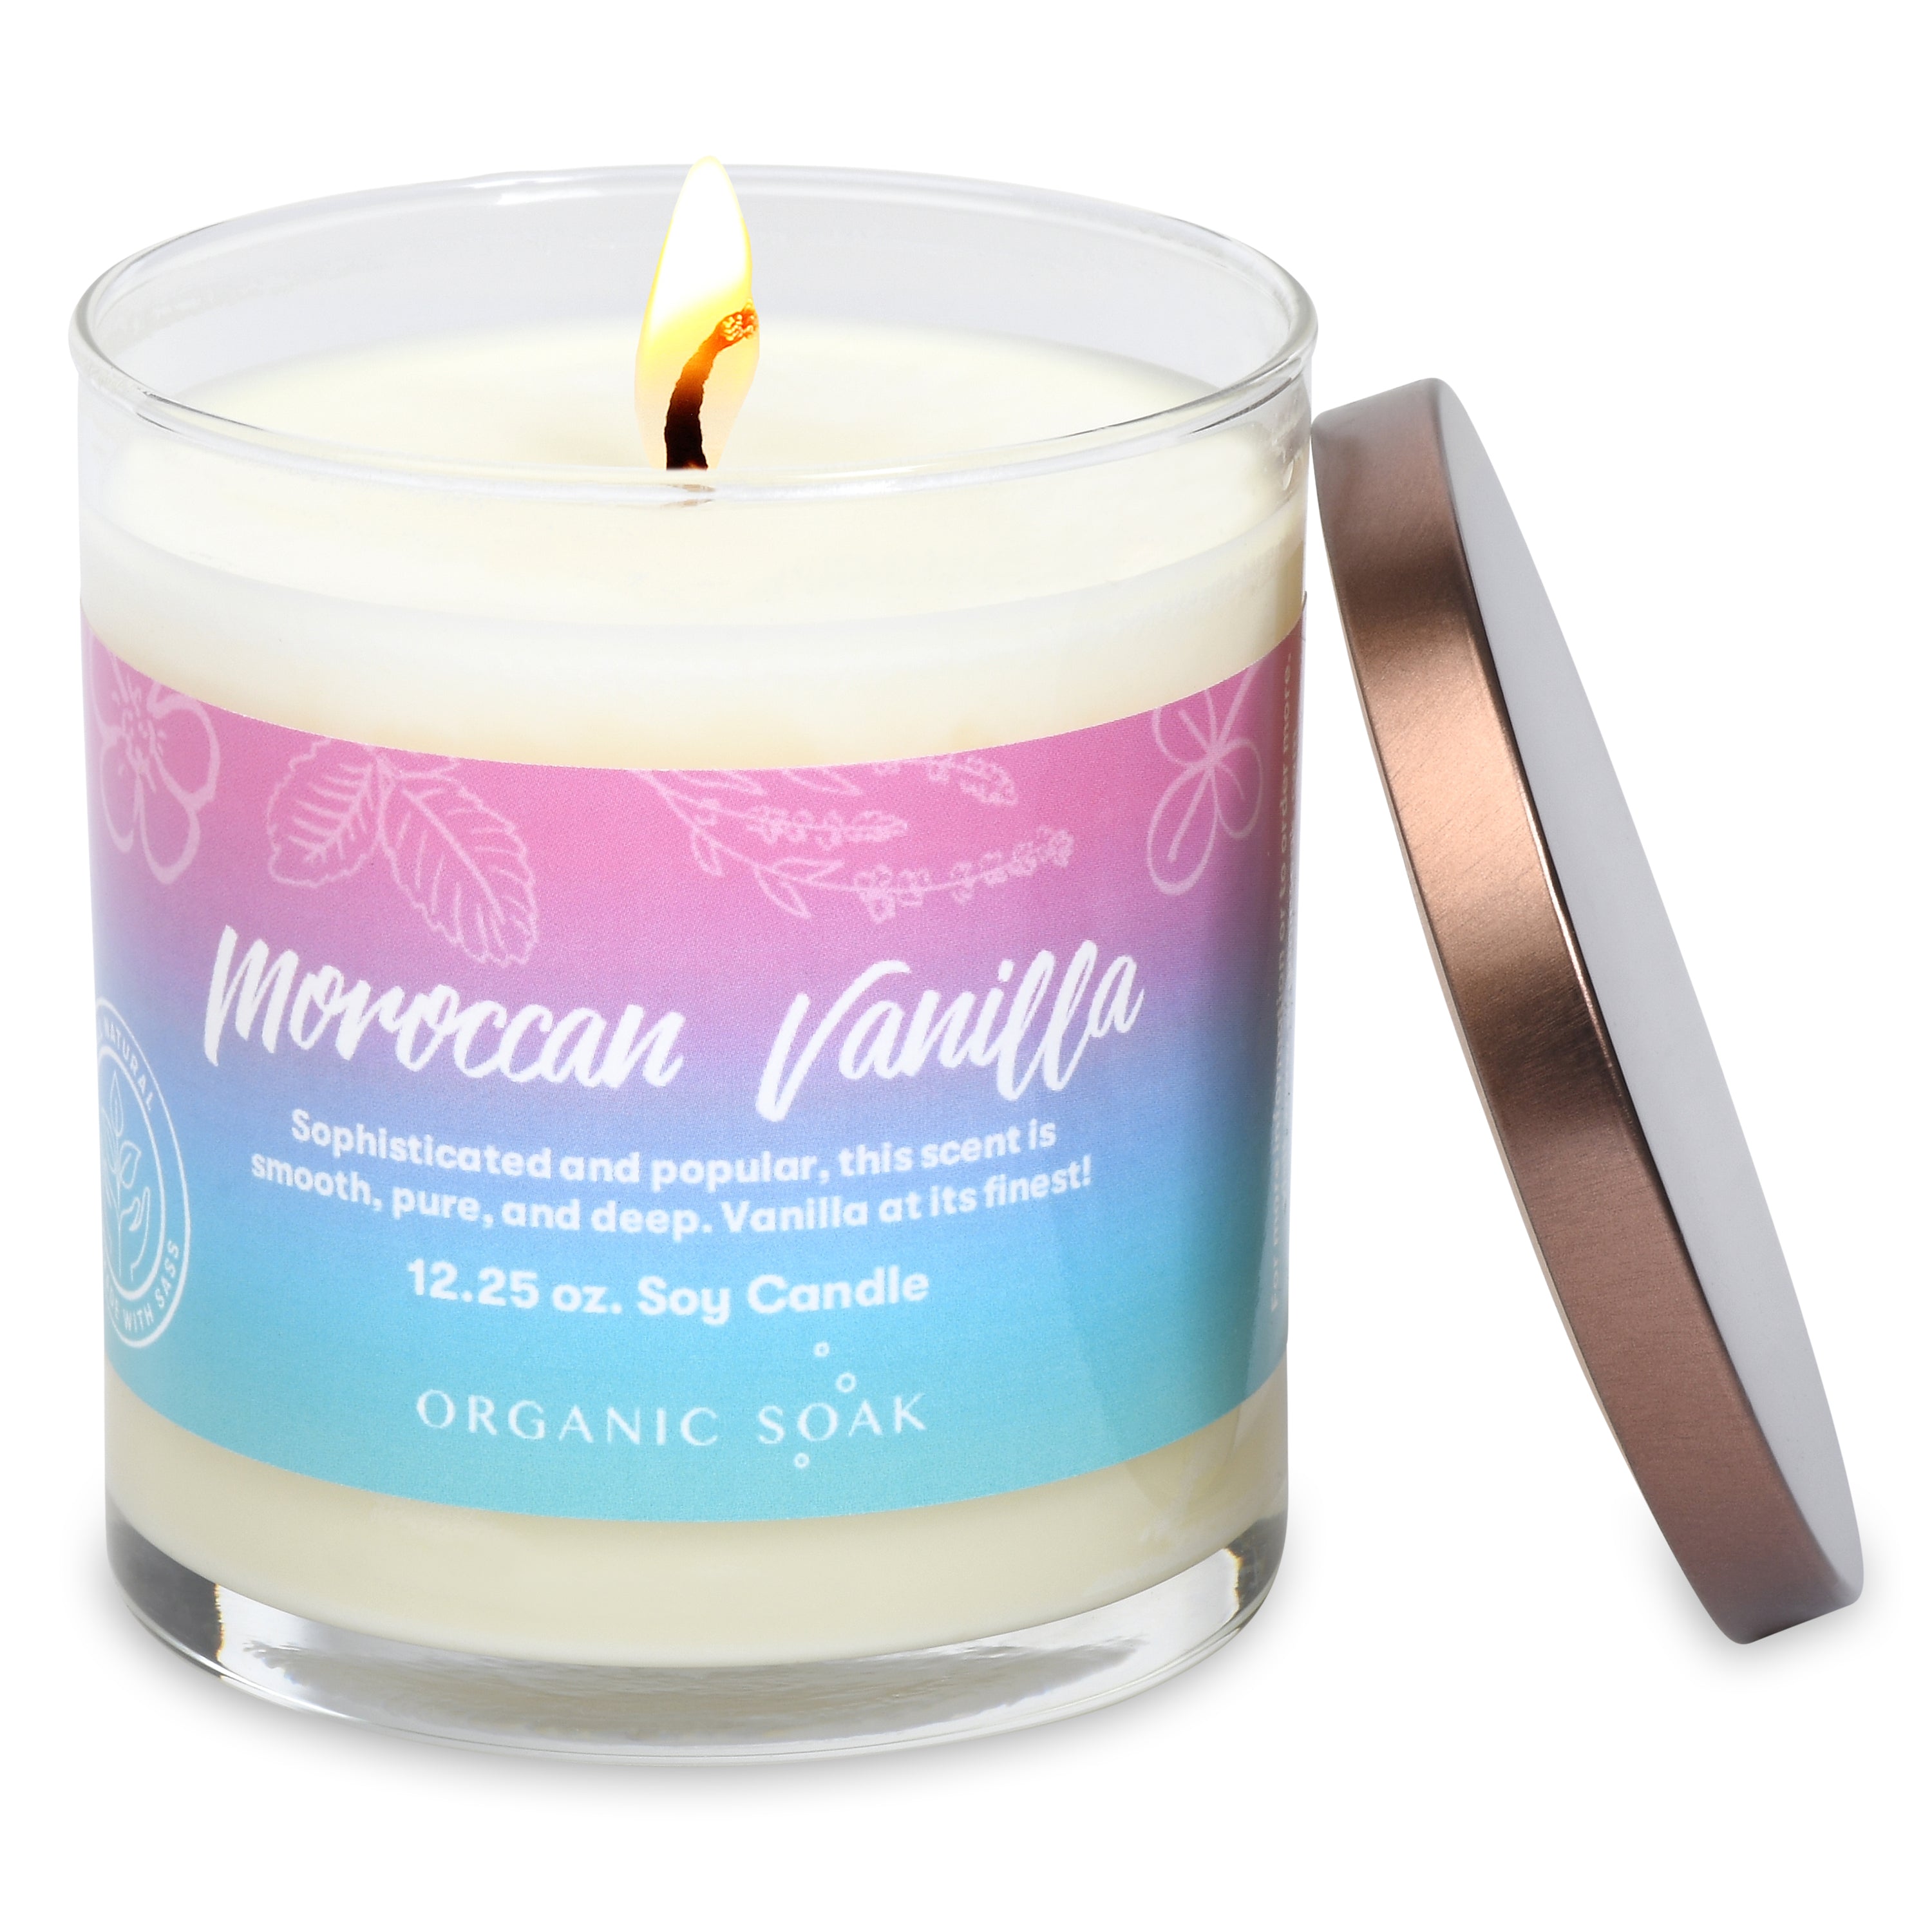 Moroccan Vanilla Scented Soy Candle